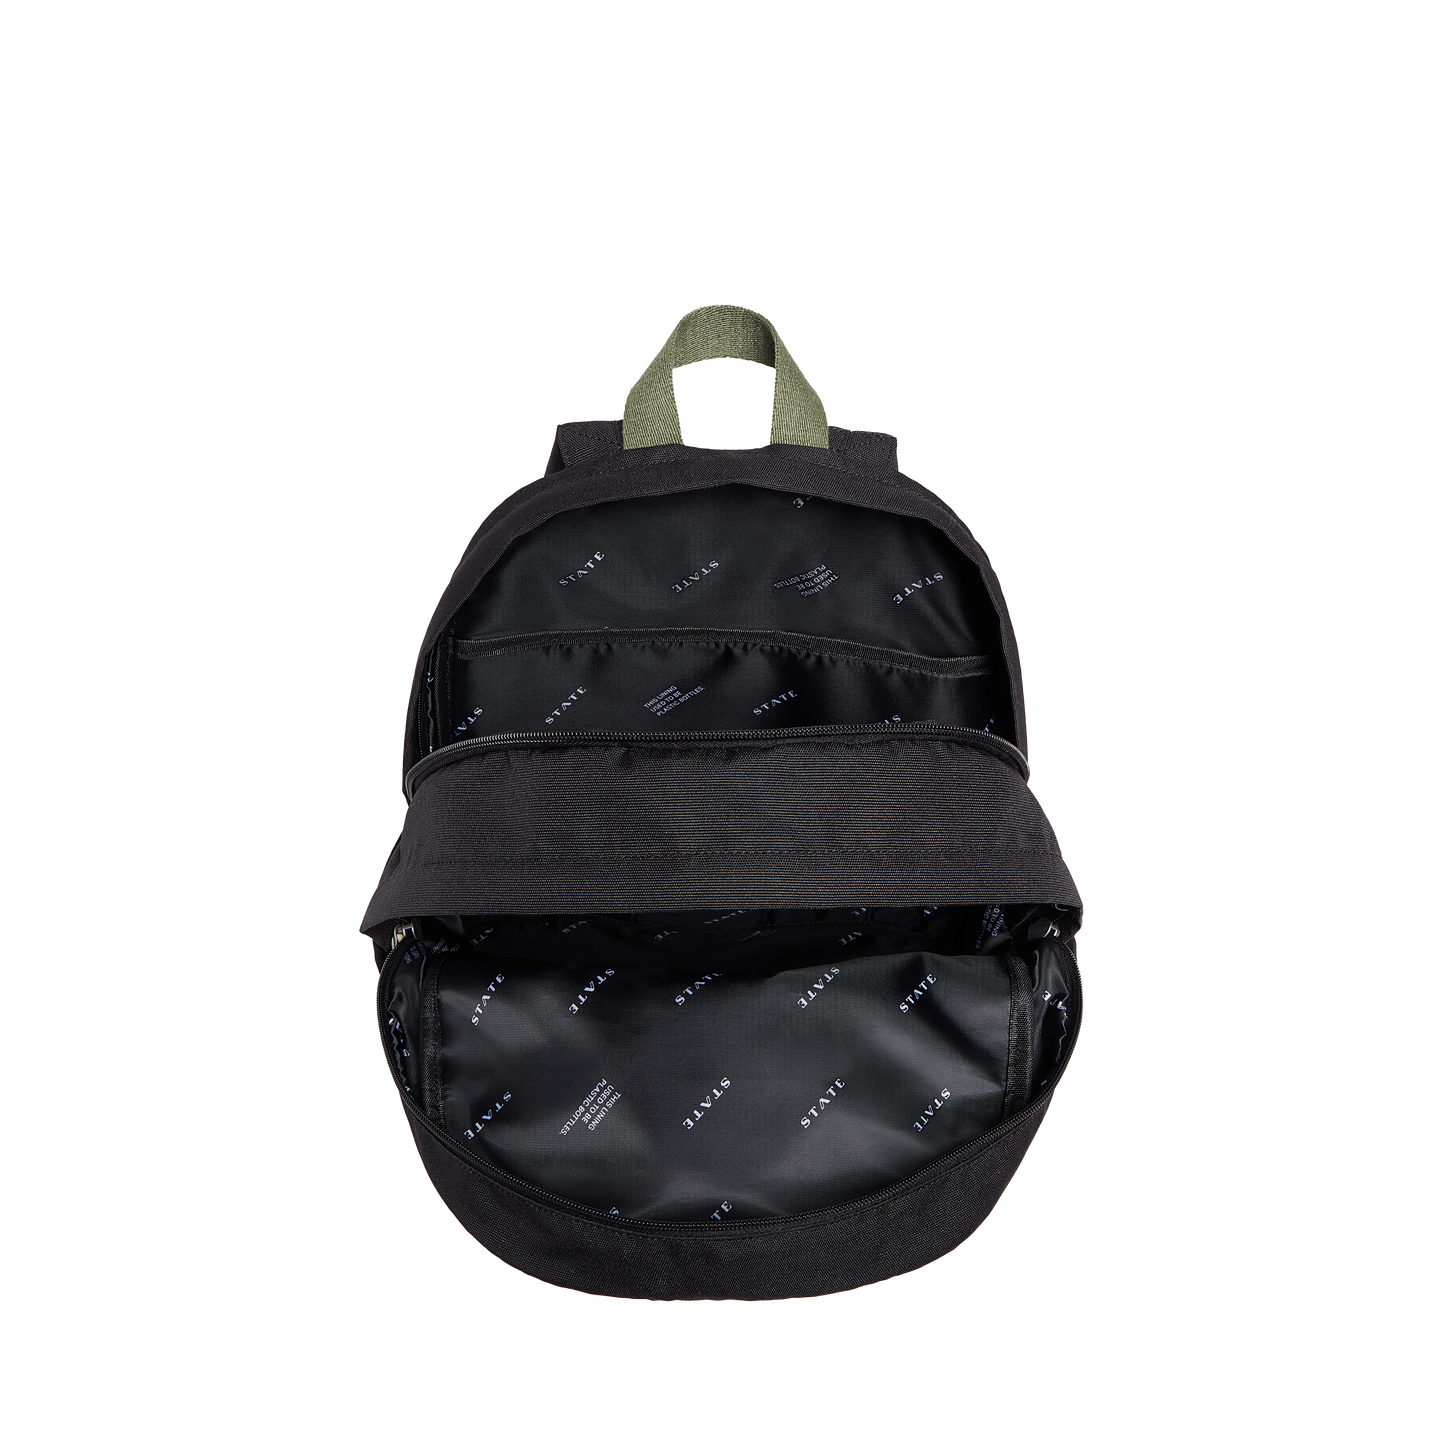 State Bags Kane Double Pocket Large Backpack